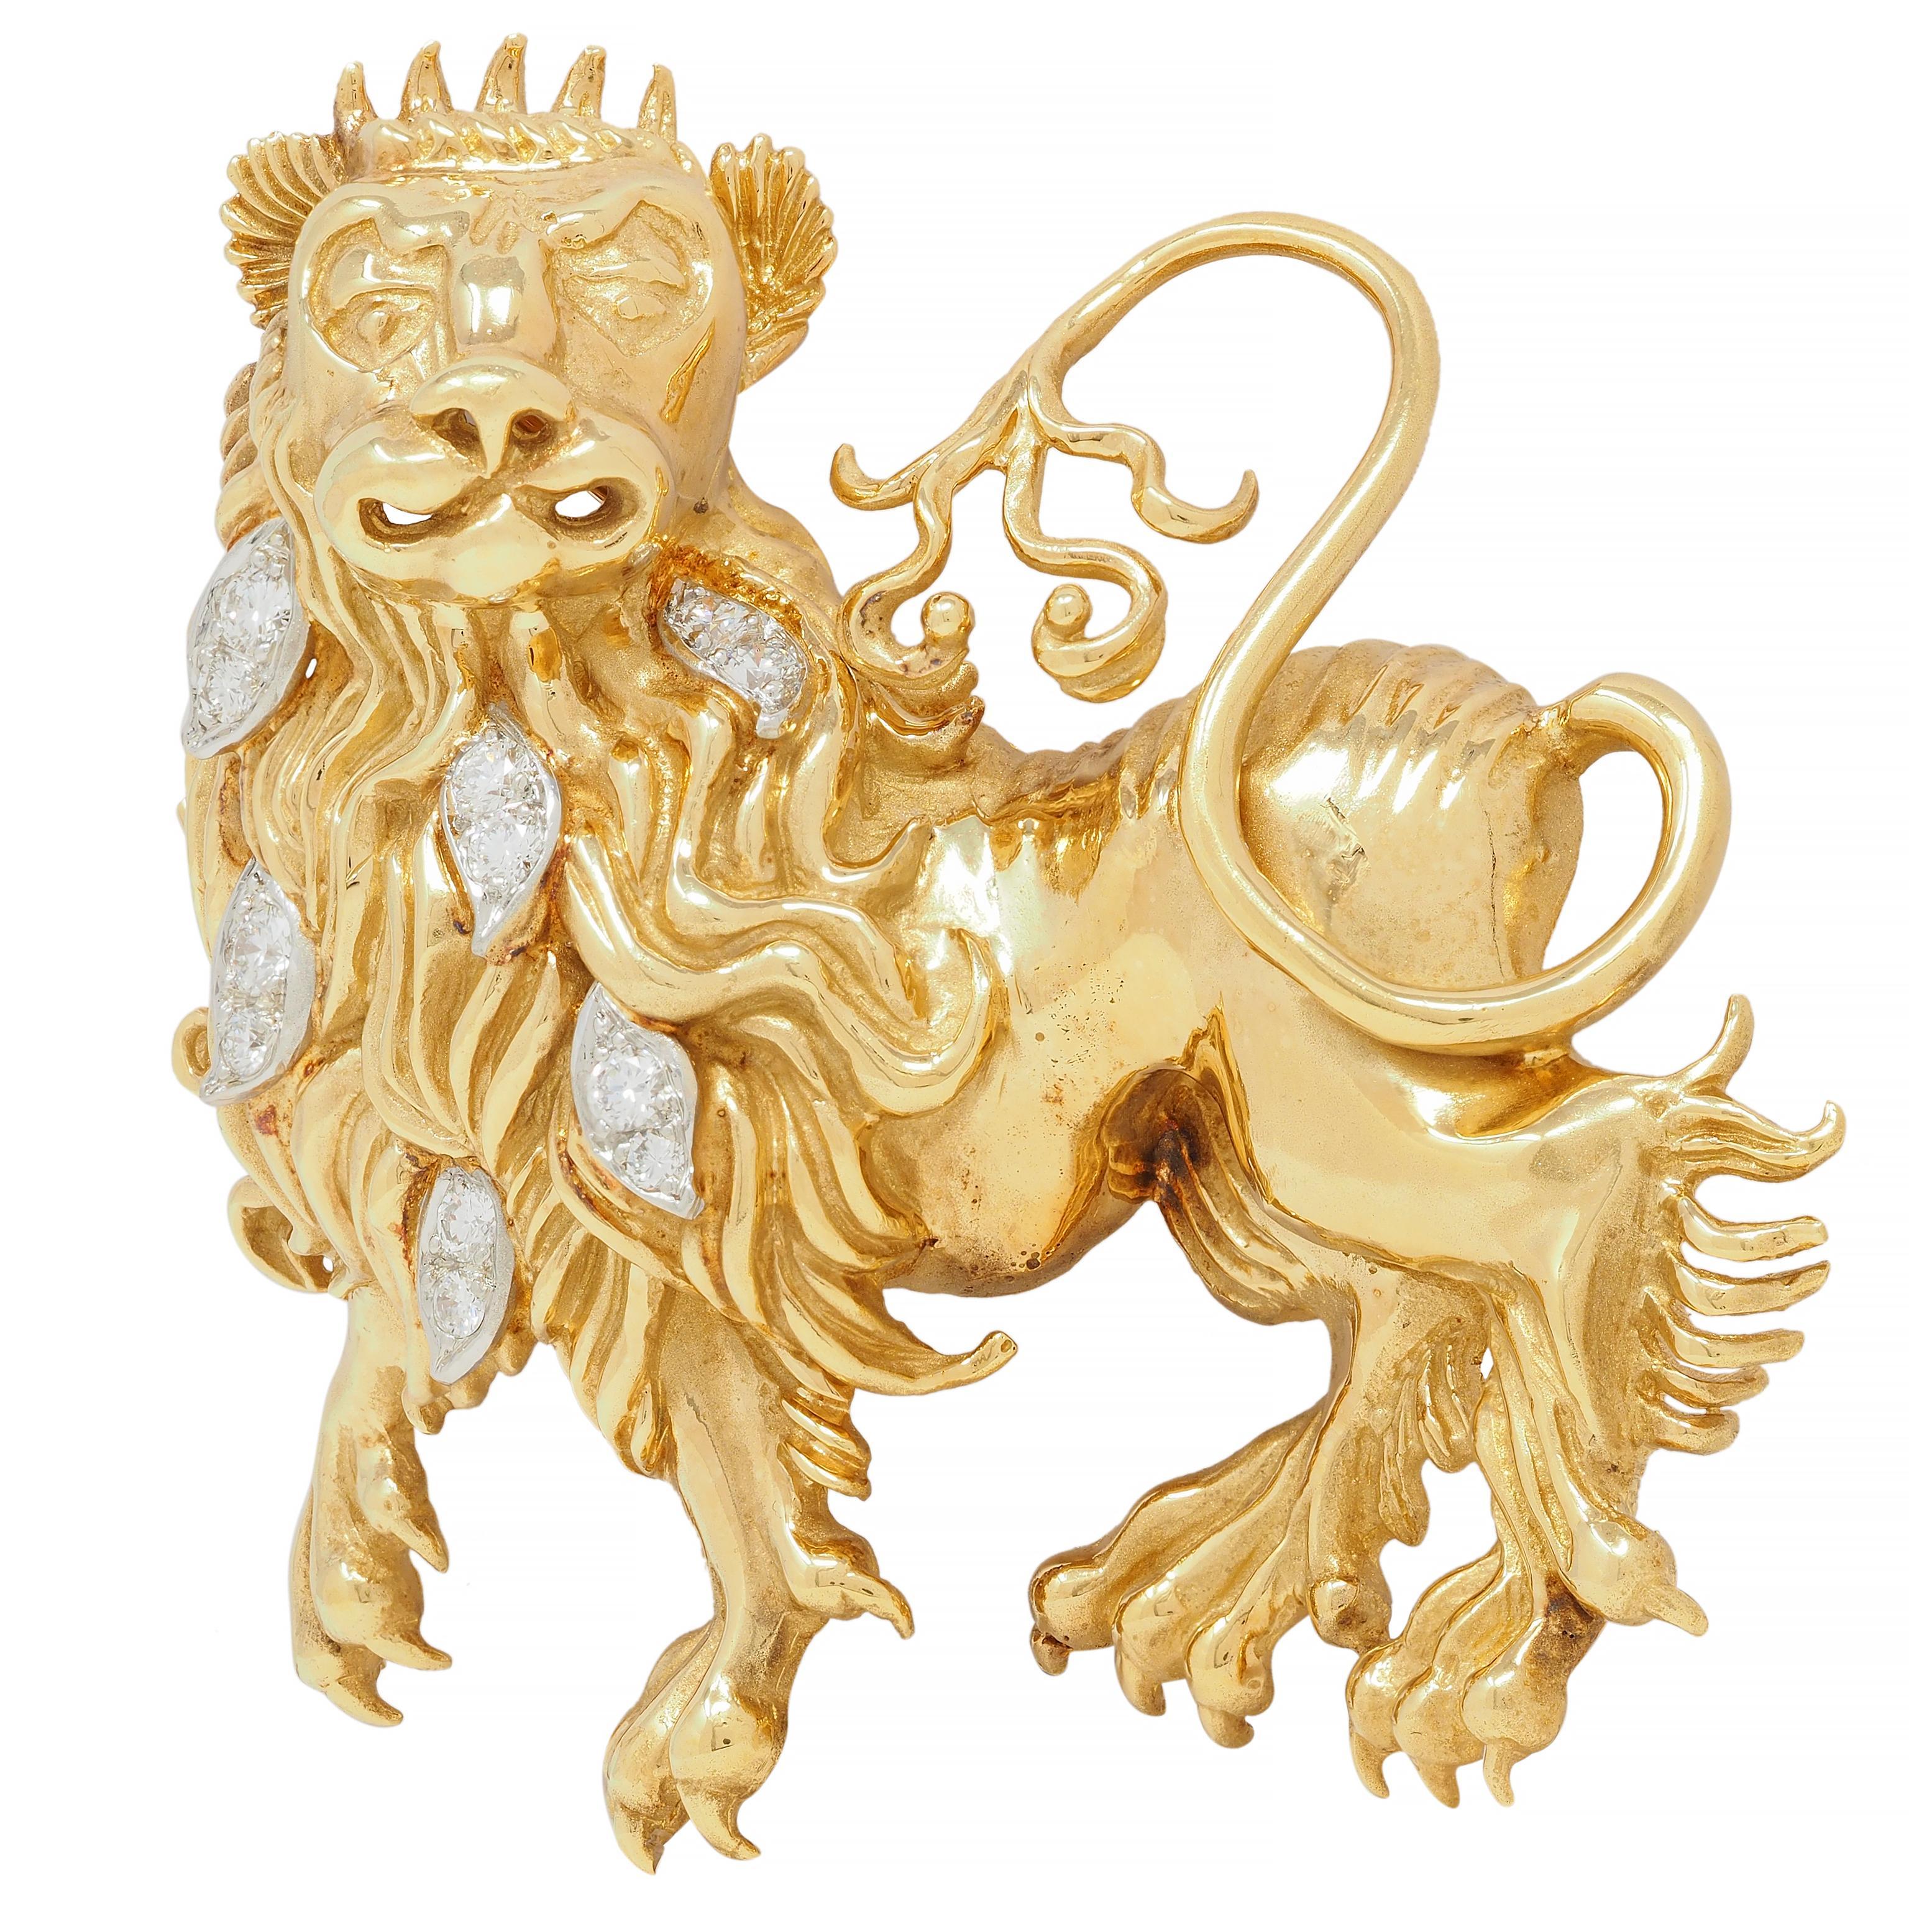 Designed as a heraldic-style lion with grooved flowing hair and a curling tail
Accented by navette-shaped platinum segments in the mane 
Bead set with transitional cut diamonds 
Weighing approximately 0.84 carats total
G/H color with VS2 to SI1